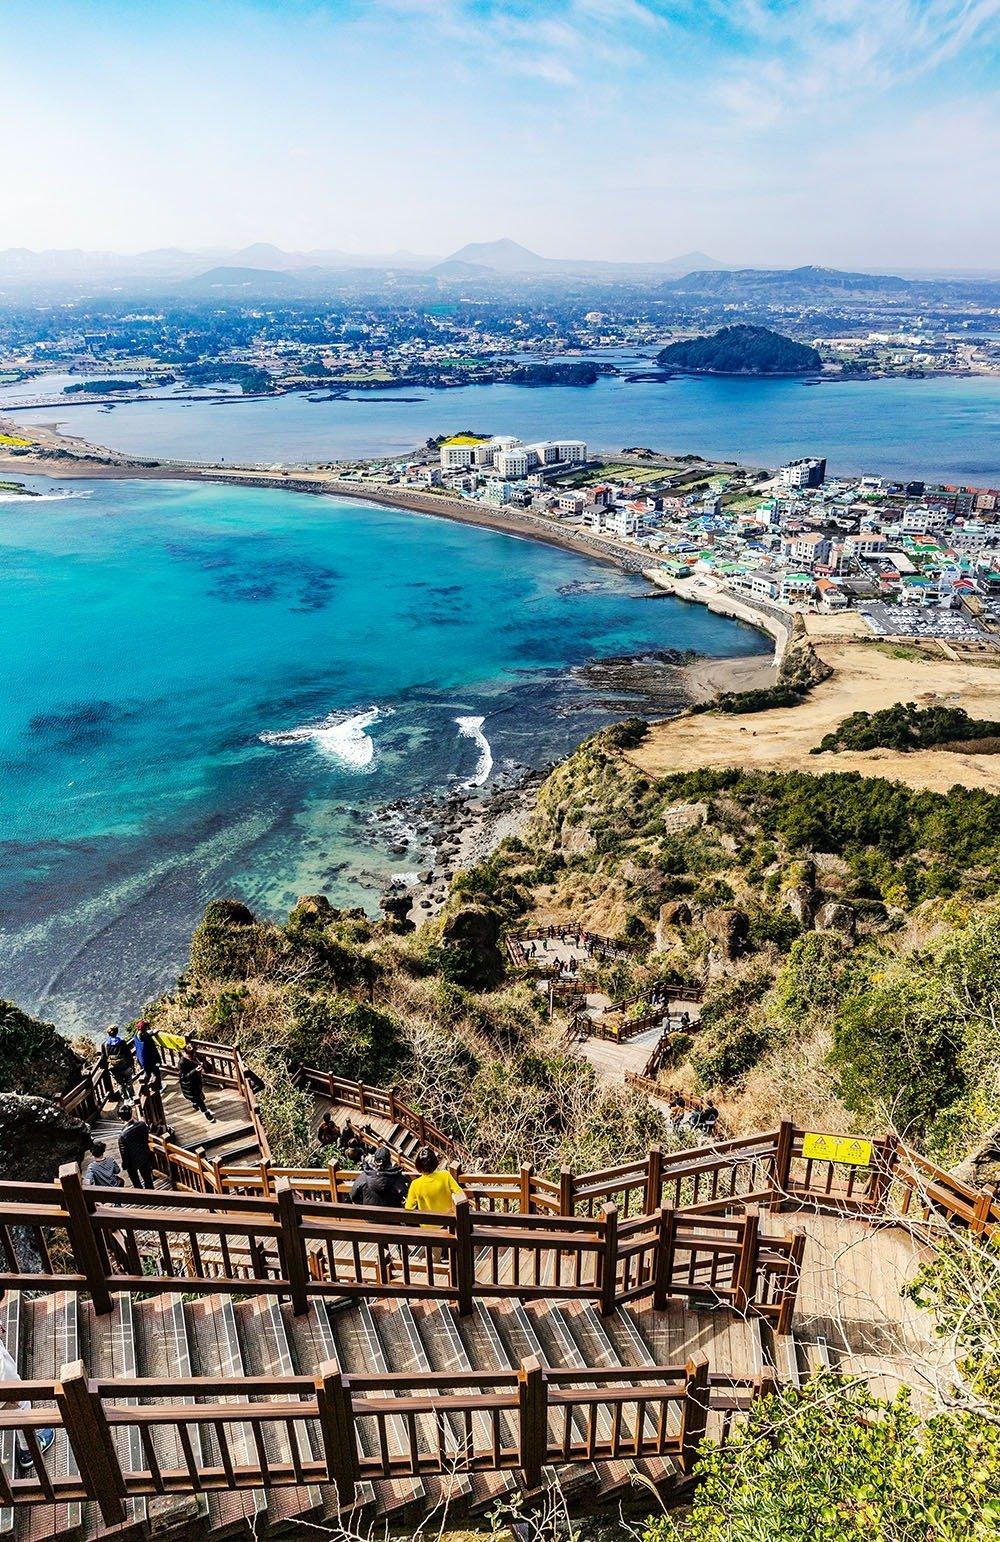 Jeju is filled with amazing natural landscapes at every turn. From stunning waterfalls to beautiful beaches and vibrant floral fields, there’s much to see and explore in South Korea’s favorite holiday destination. Plan your trip to the island now - here’s where to stay in Jeju.